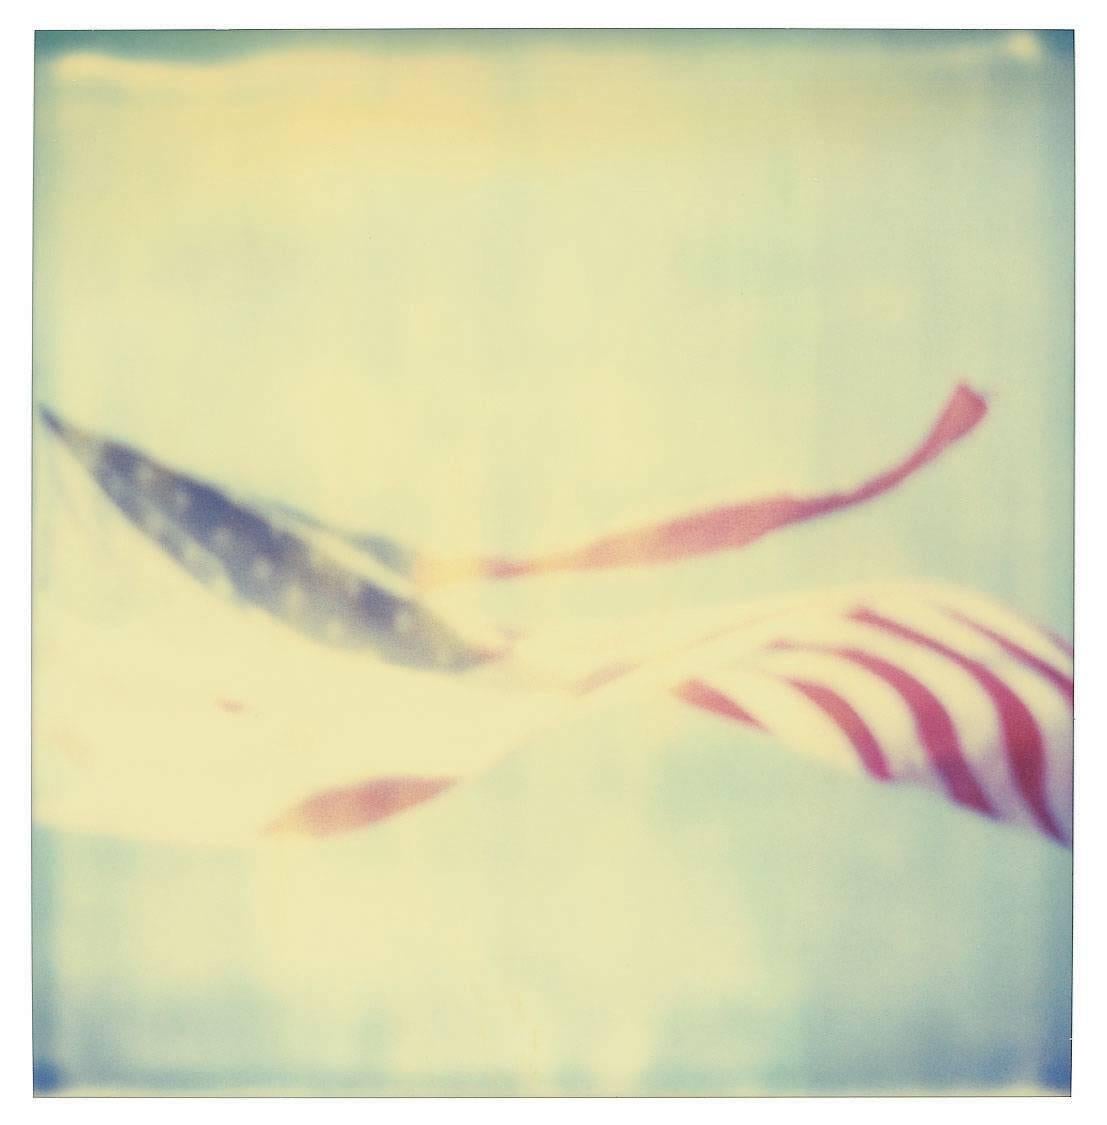 Primary Colors - Contemporary, Figurative, Icons, Polaroid, Photograph, expired 4